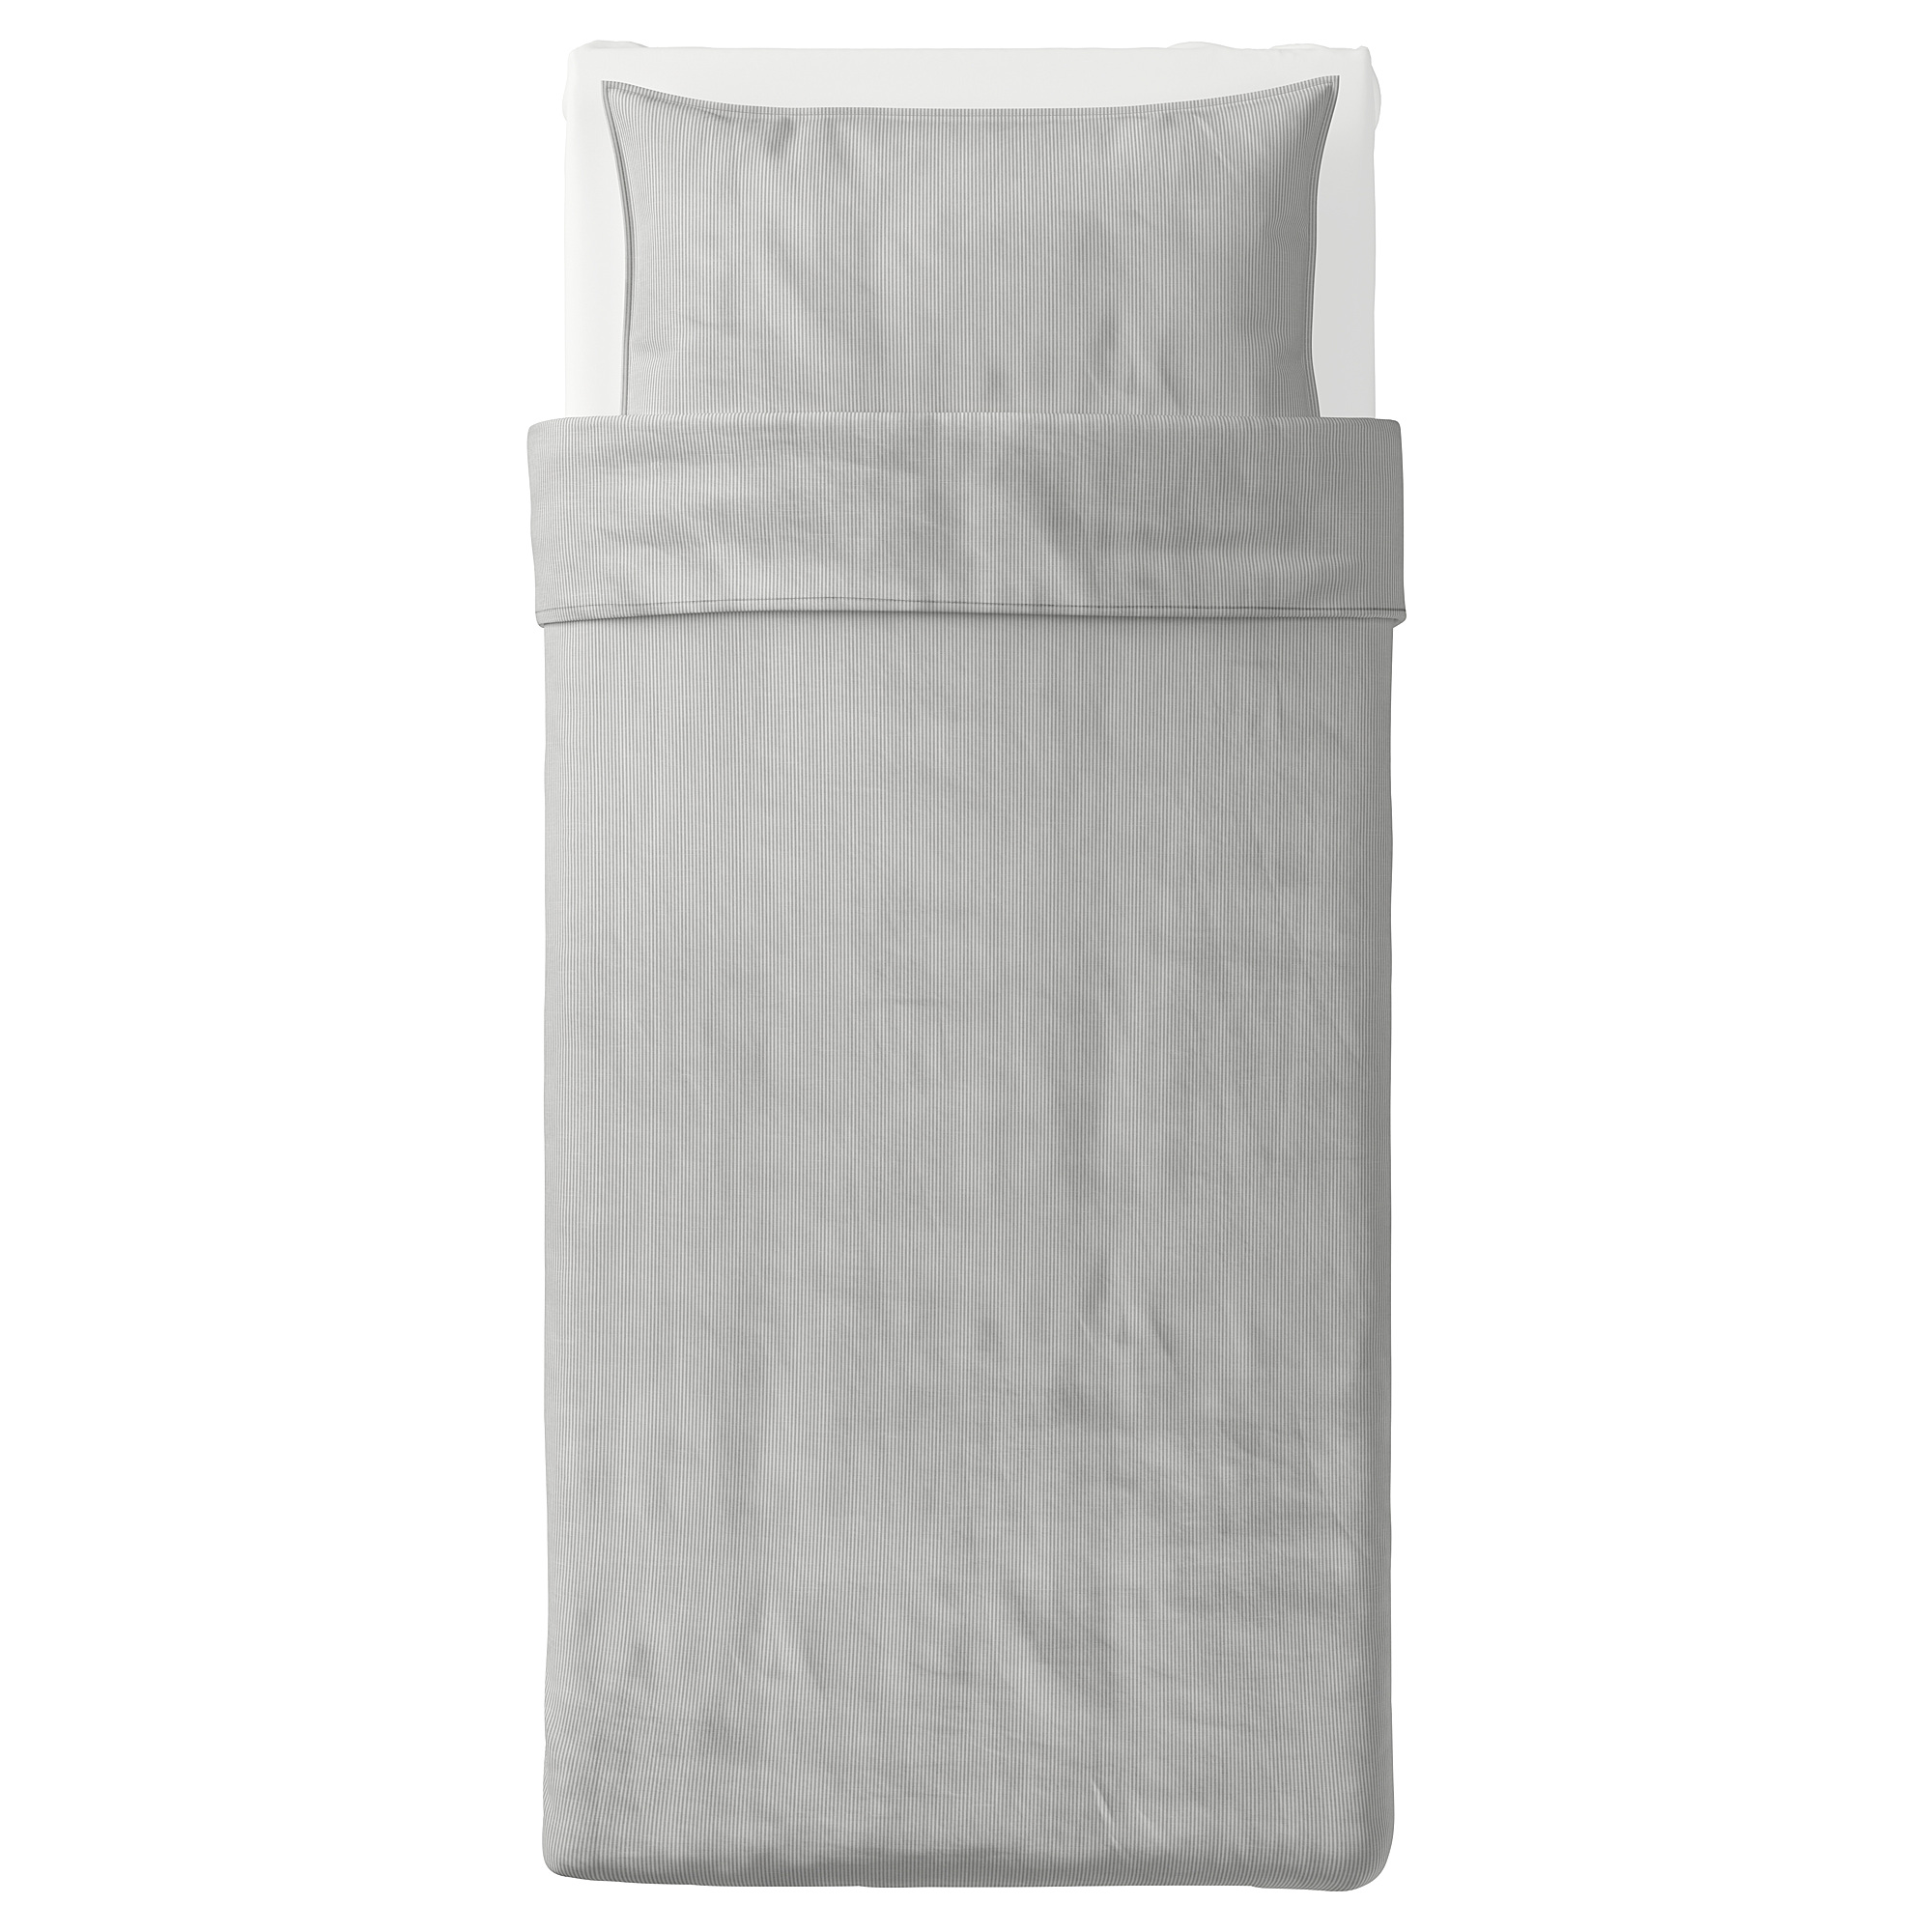 BERGPALM duvet cover and pillowcase